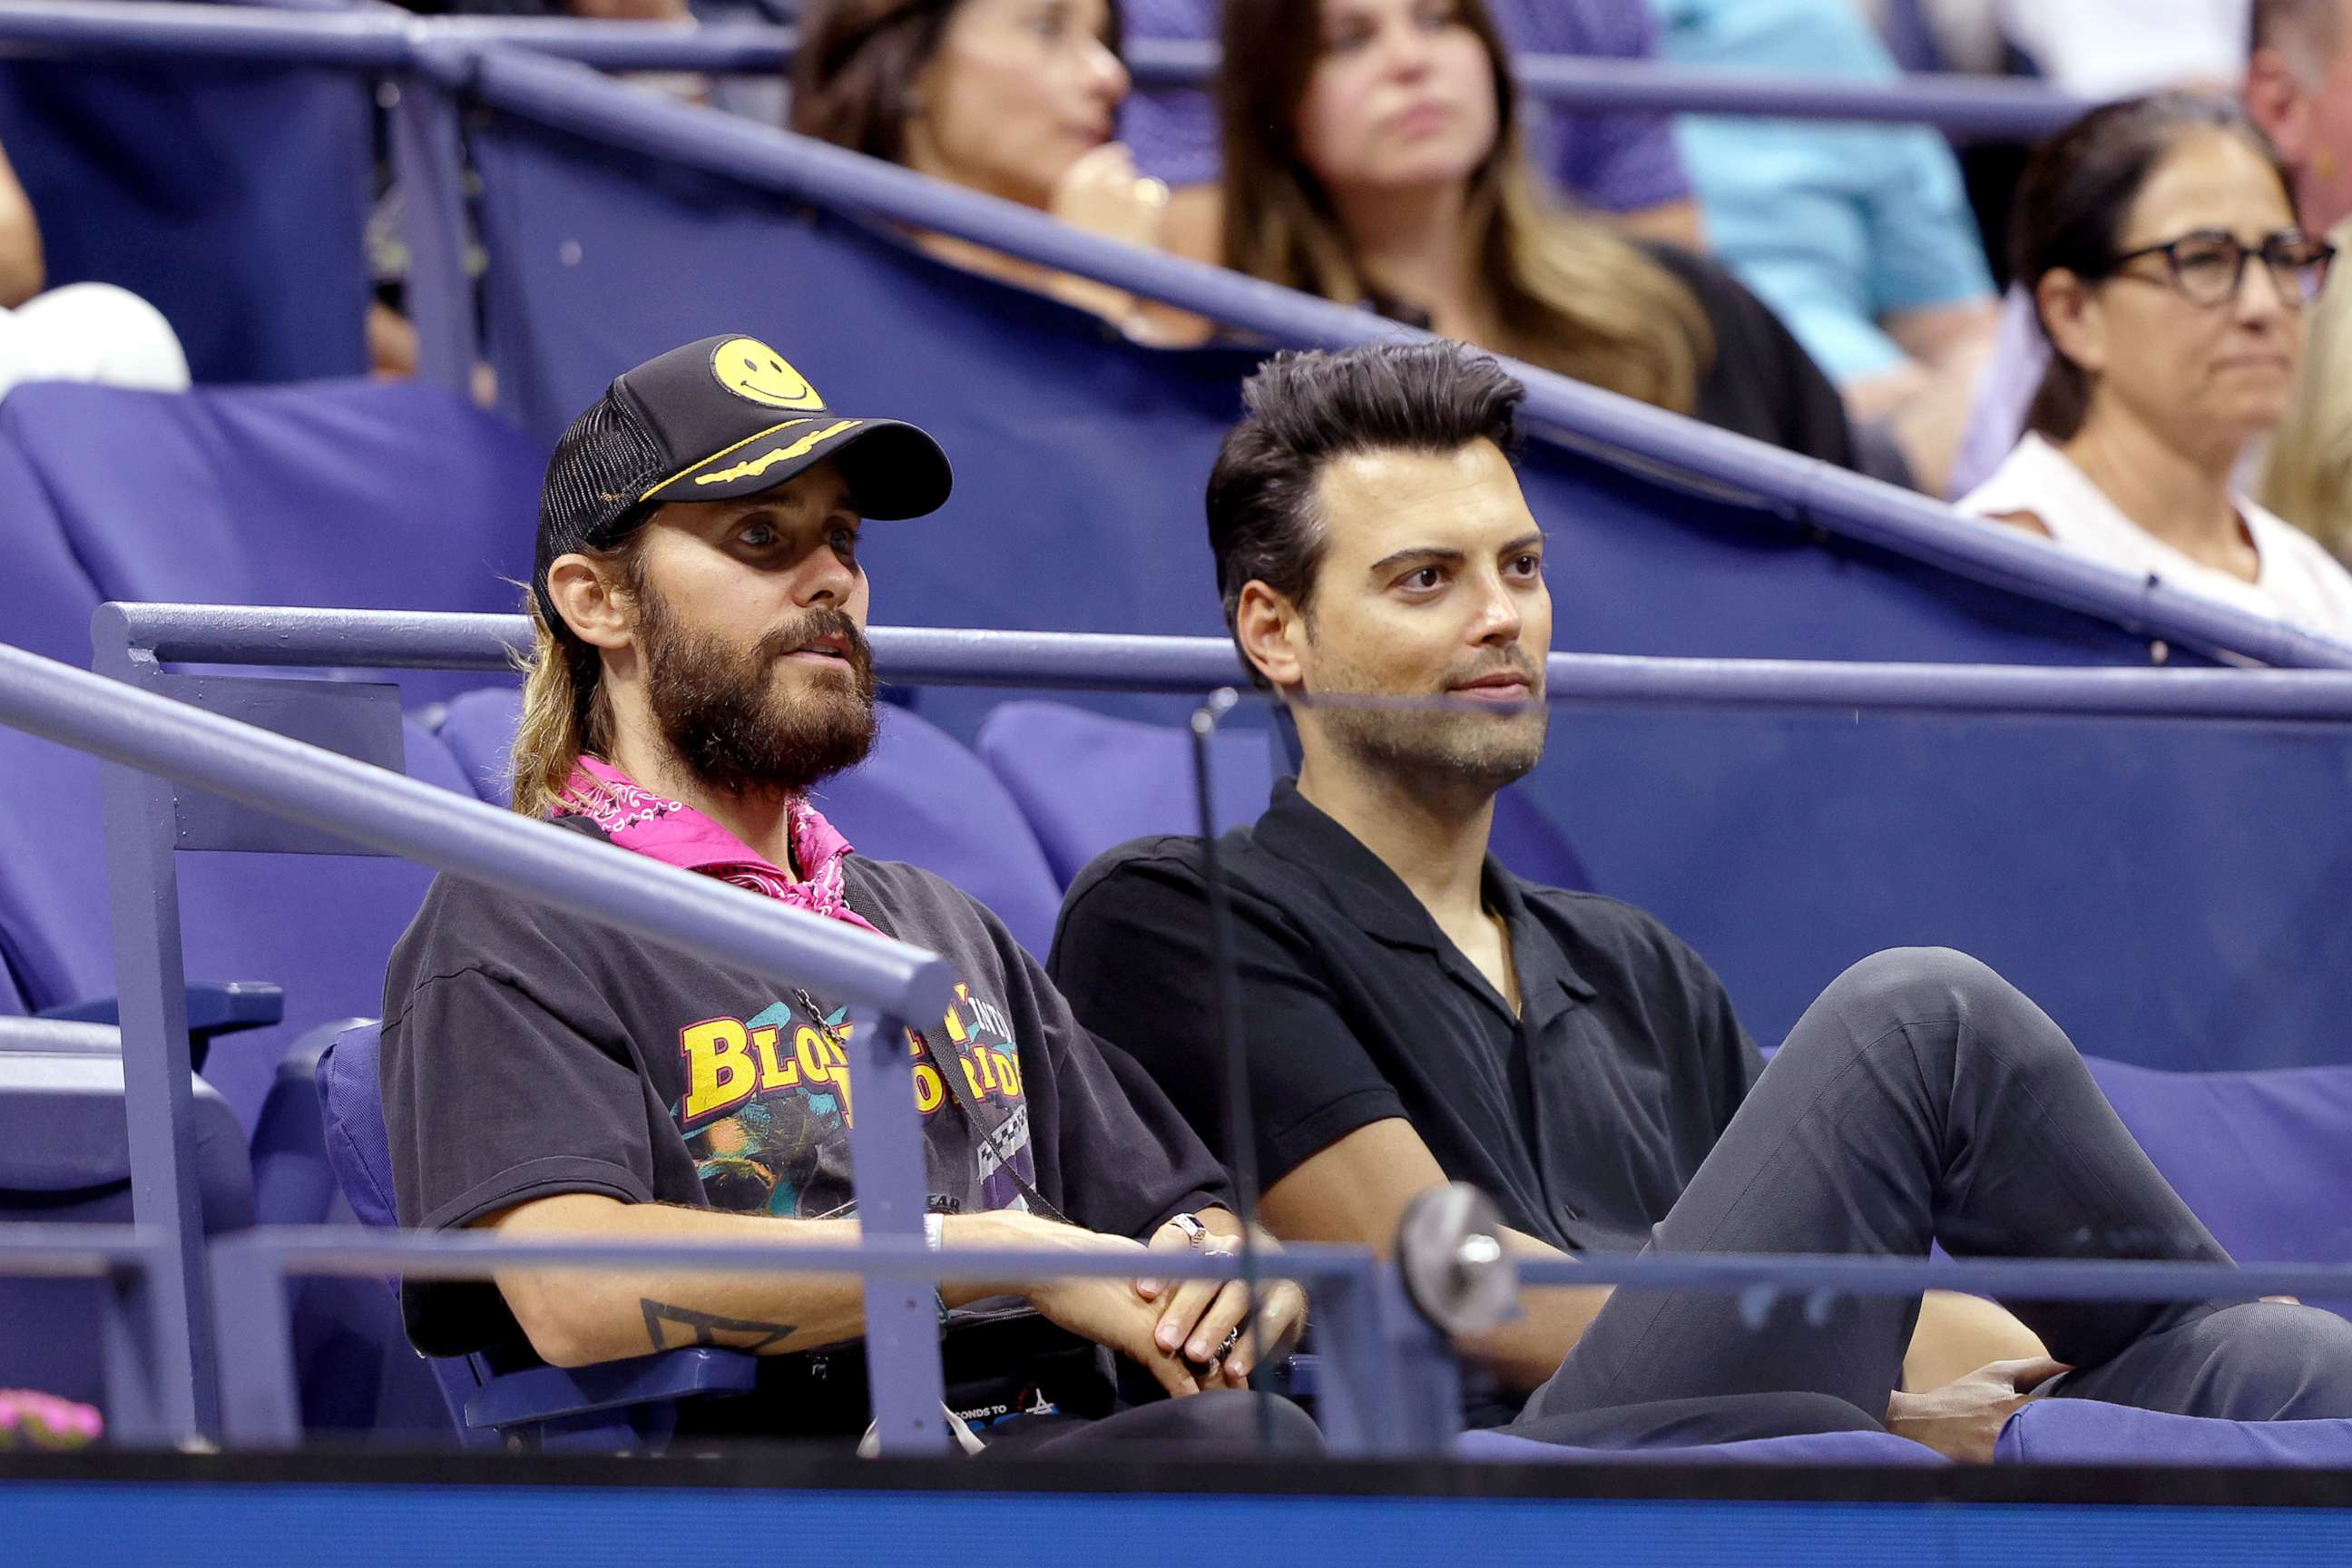 PHOTO: Jared Leto (left) attends the Women's Singles Second Round match between Anett Kontaveit of Estonia and Serena Williams of the United States on Day 3 of the U.S. Open in New York, Aug. 31, 2022.